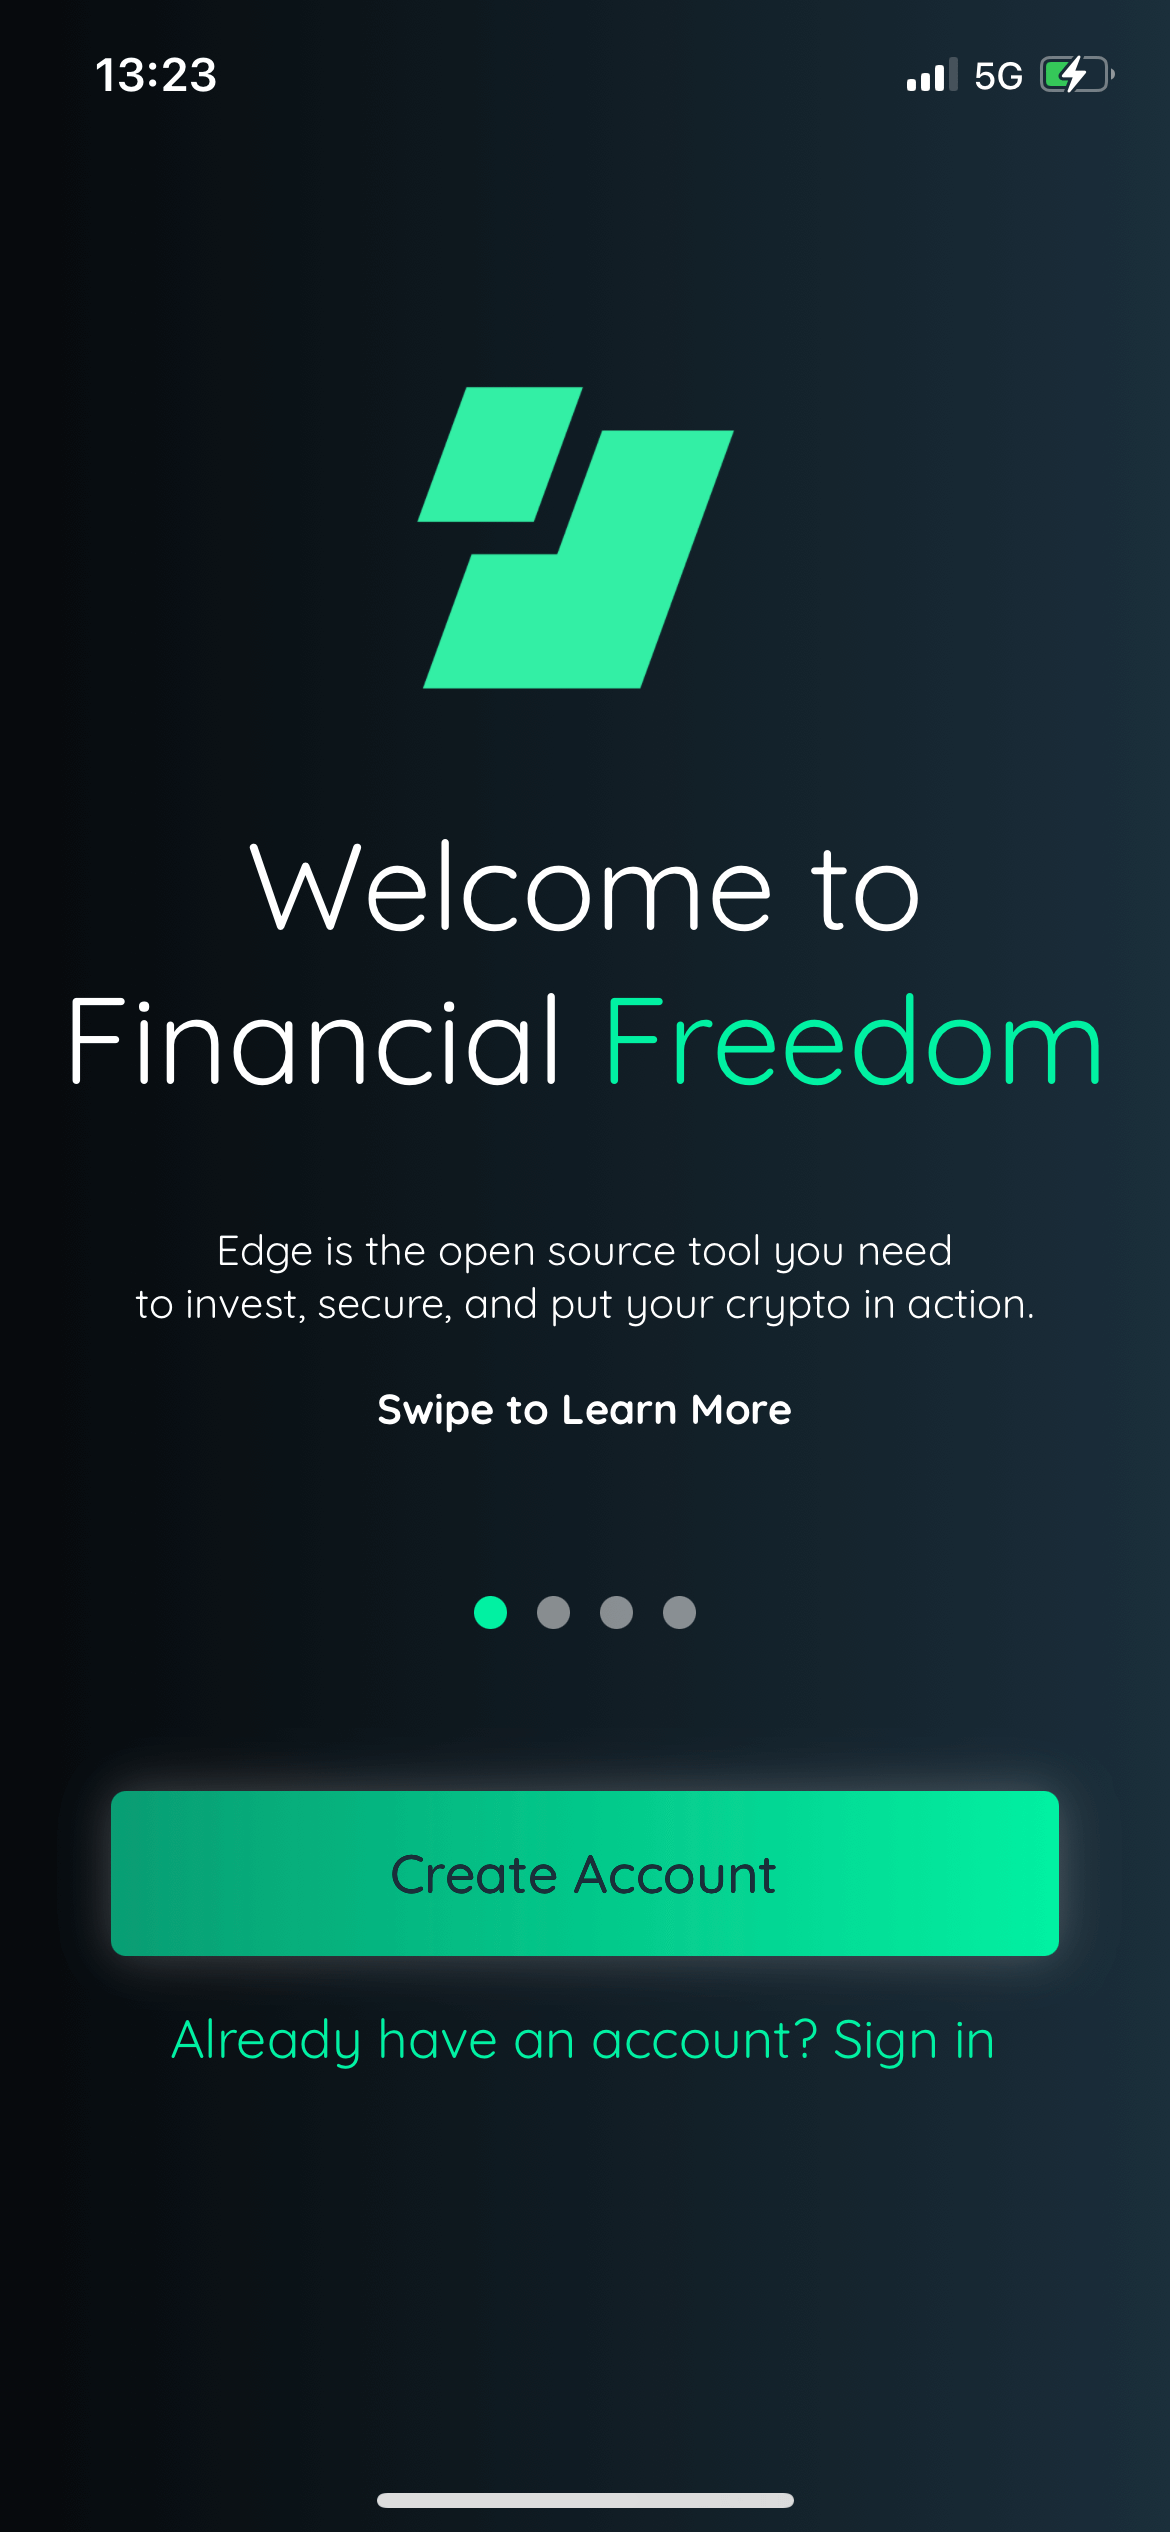 Step 2: Create your Edge Wallet Account